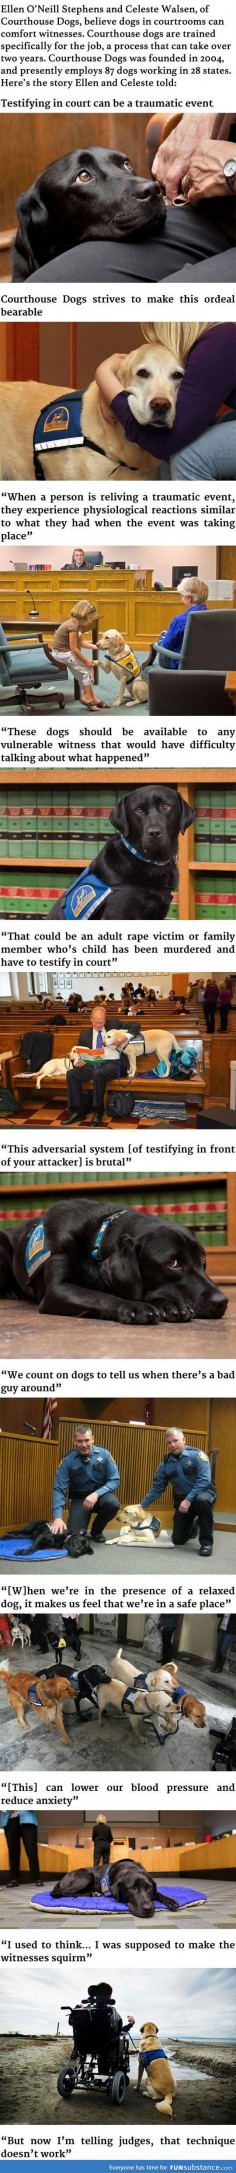 These Courthouse Dogs Are Trained to Comfort Witnesses in Courtrooms